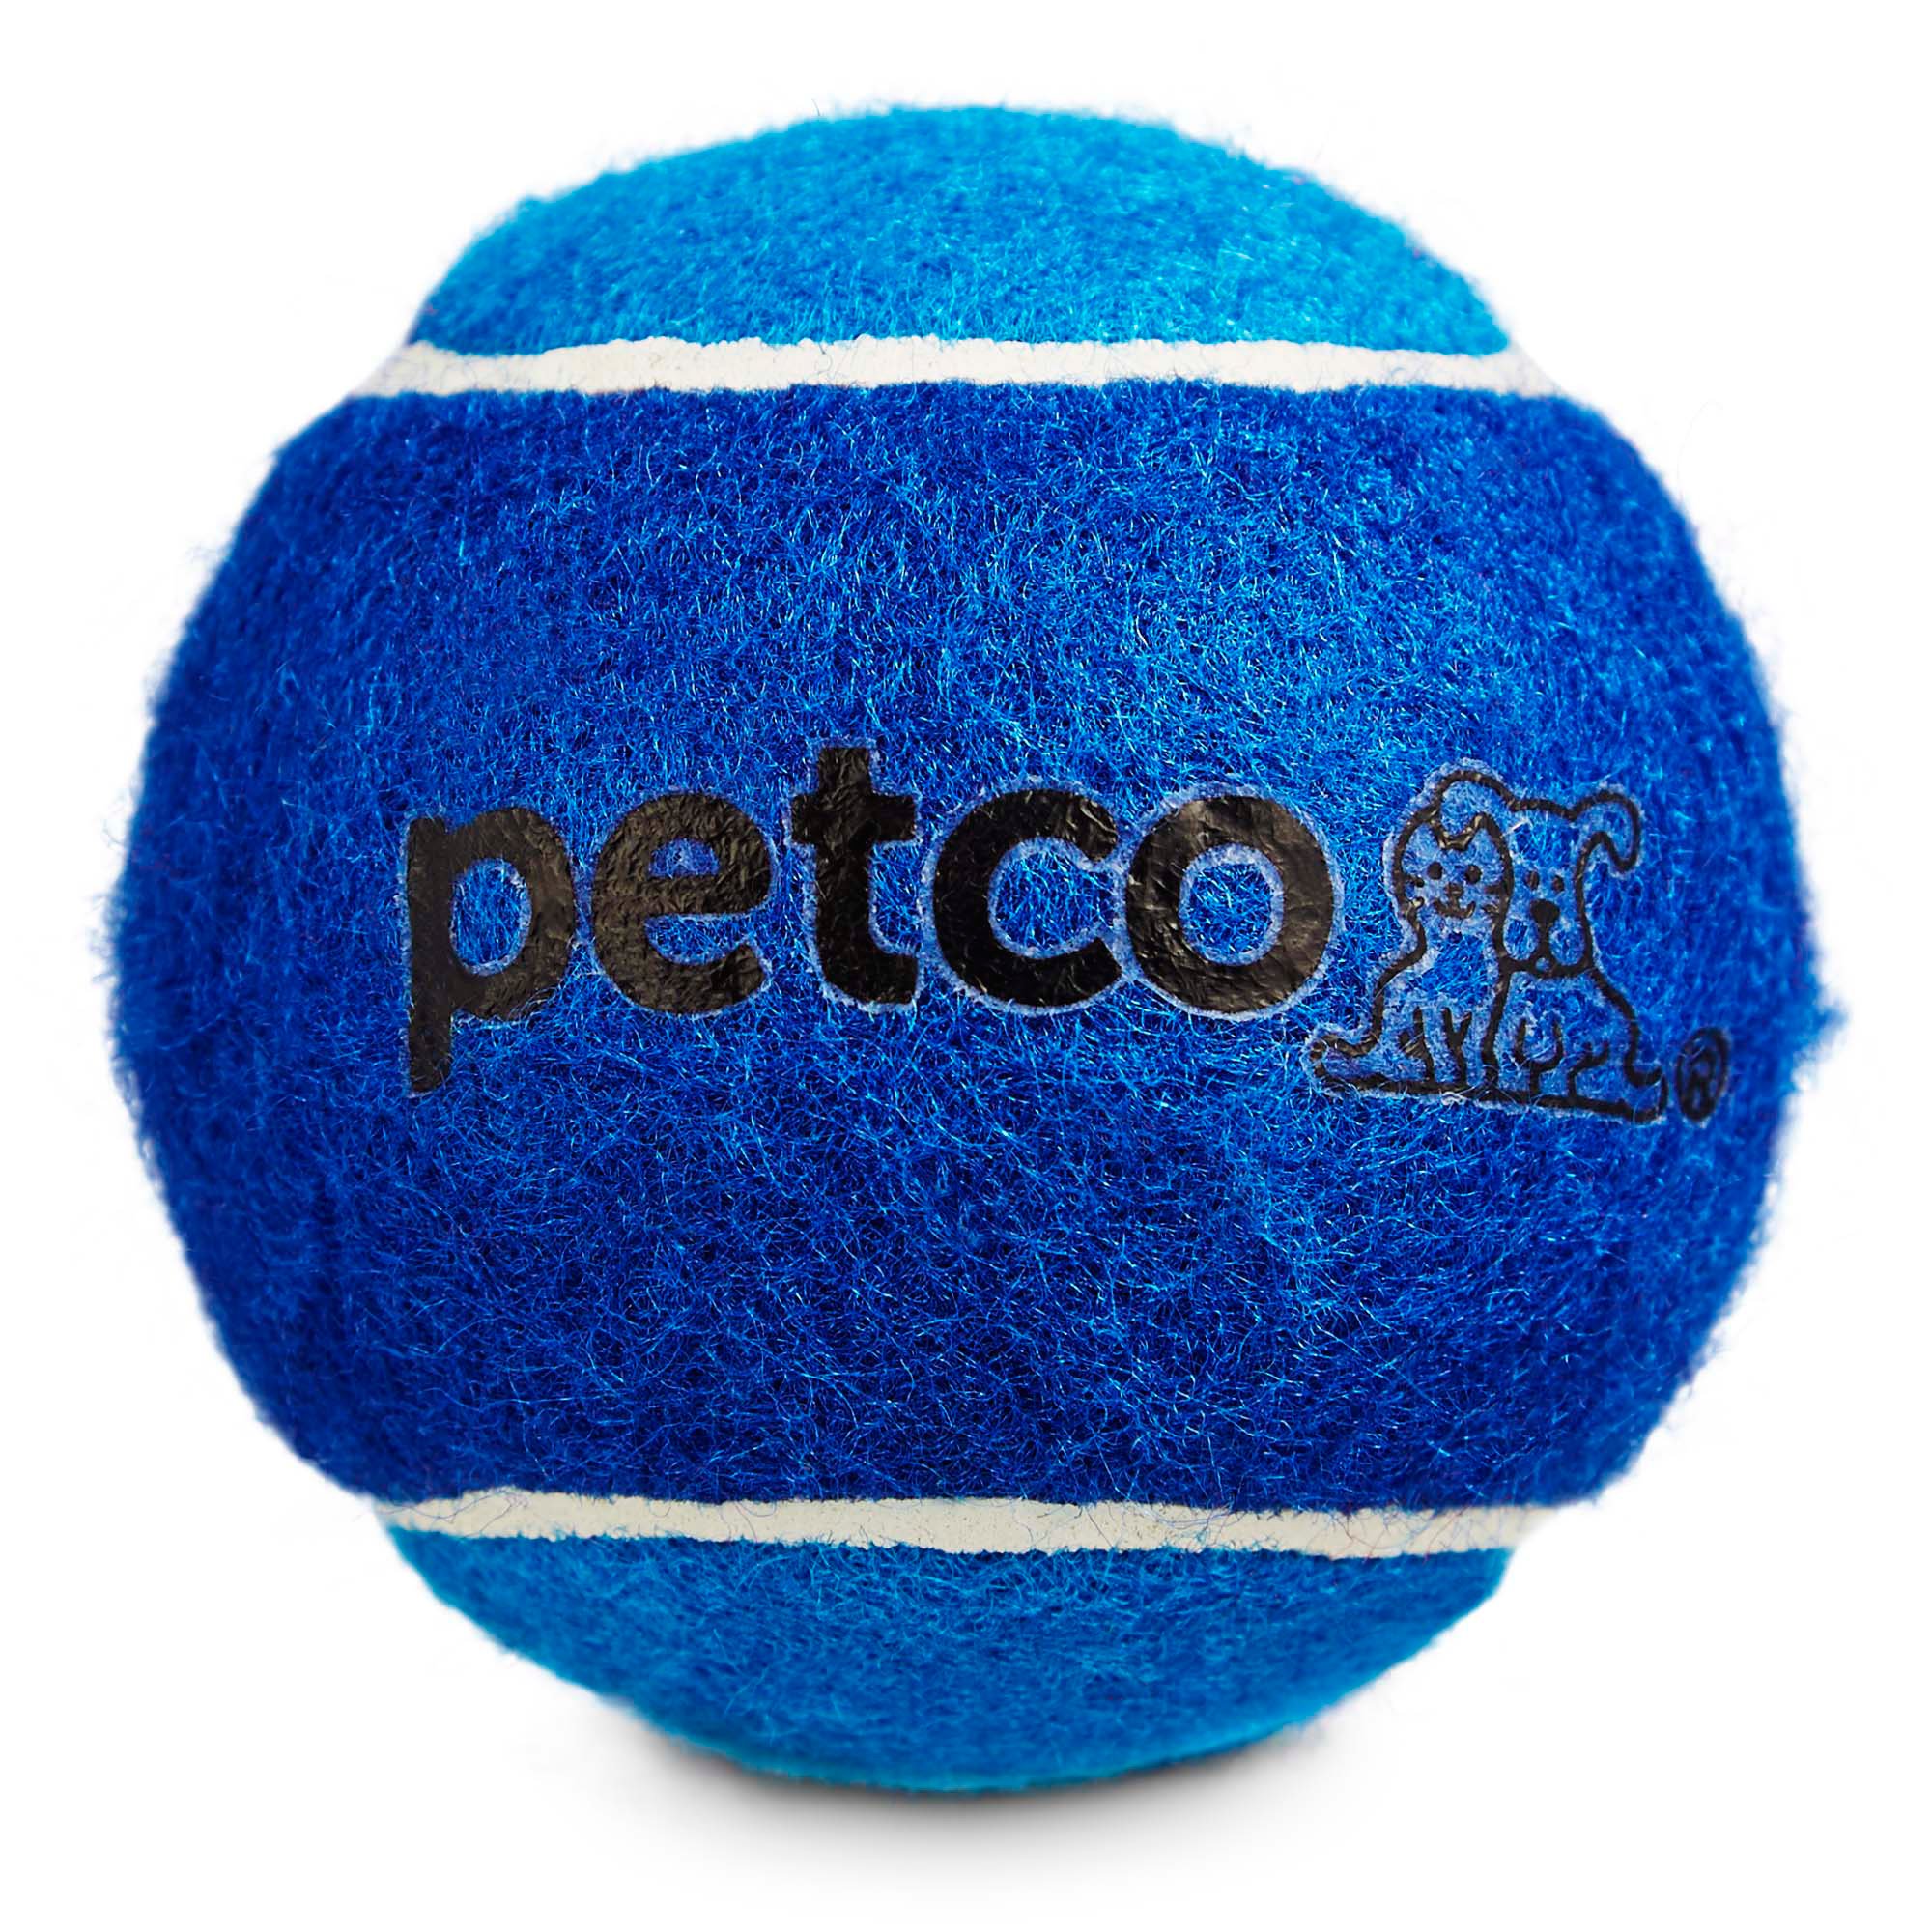 Petco Tennis Ball Dog Toy in Blue | Petco